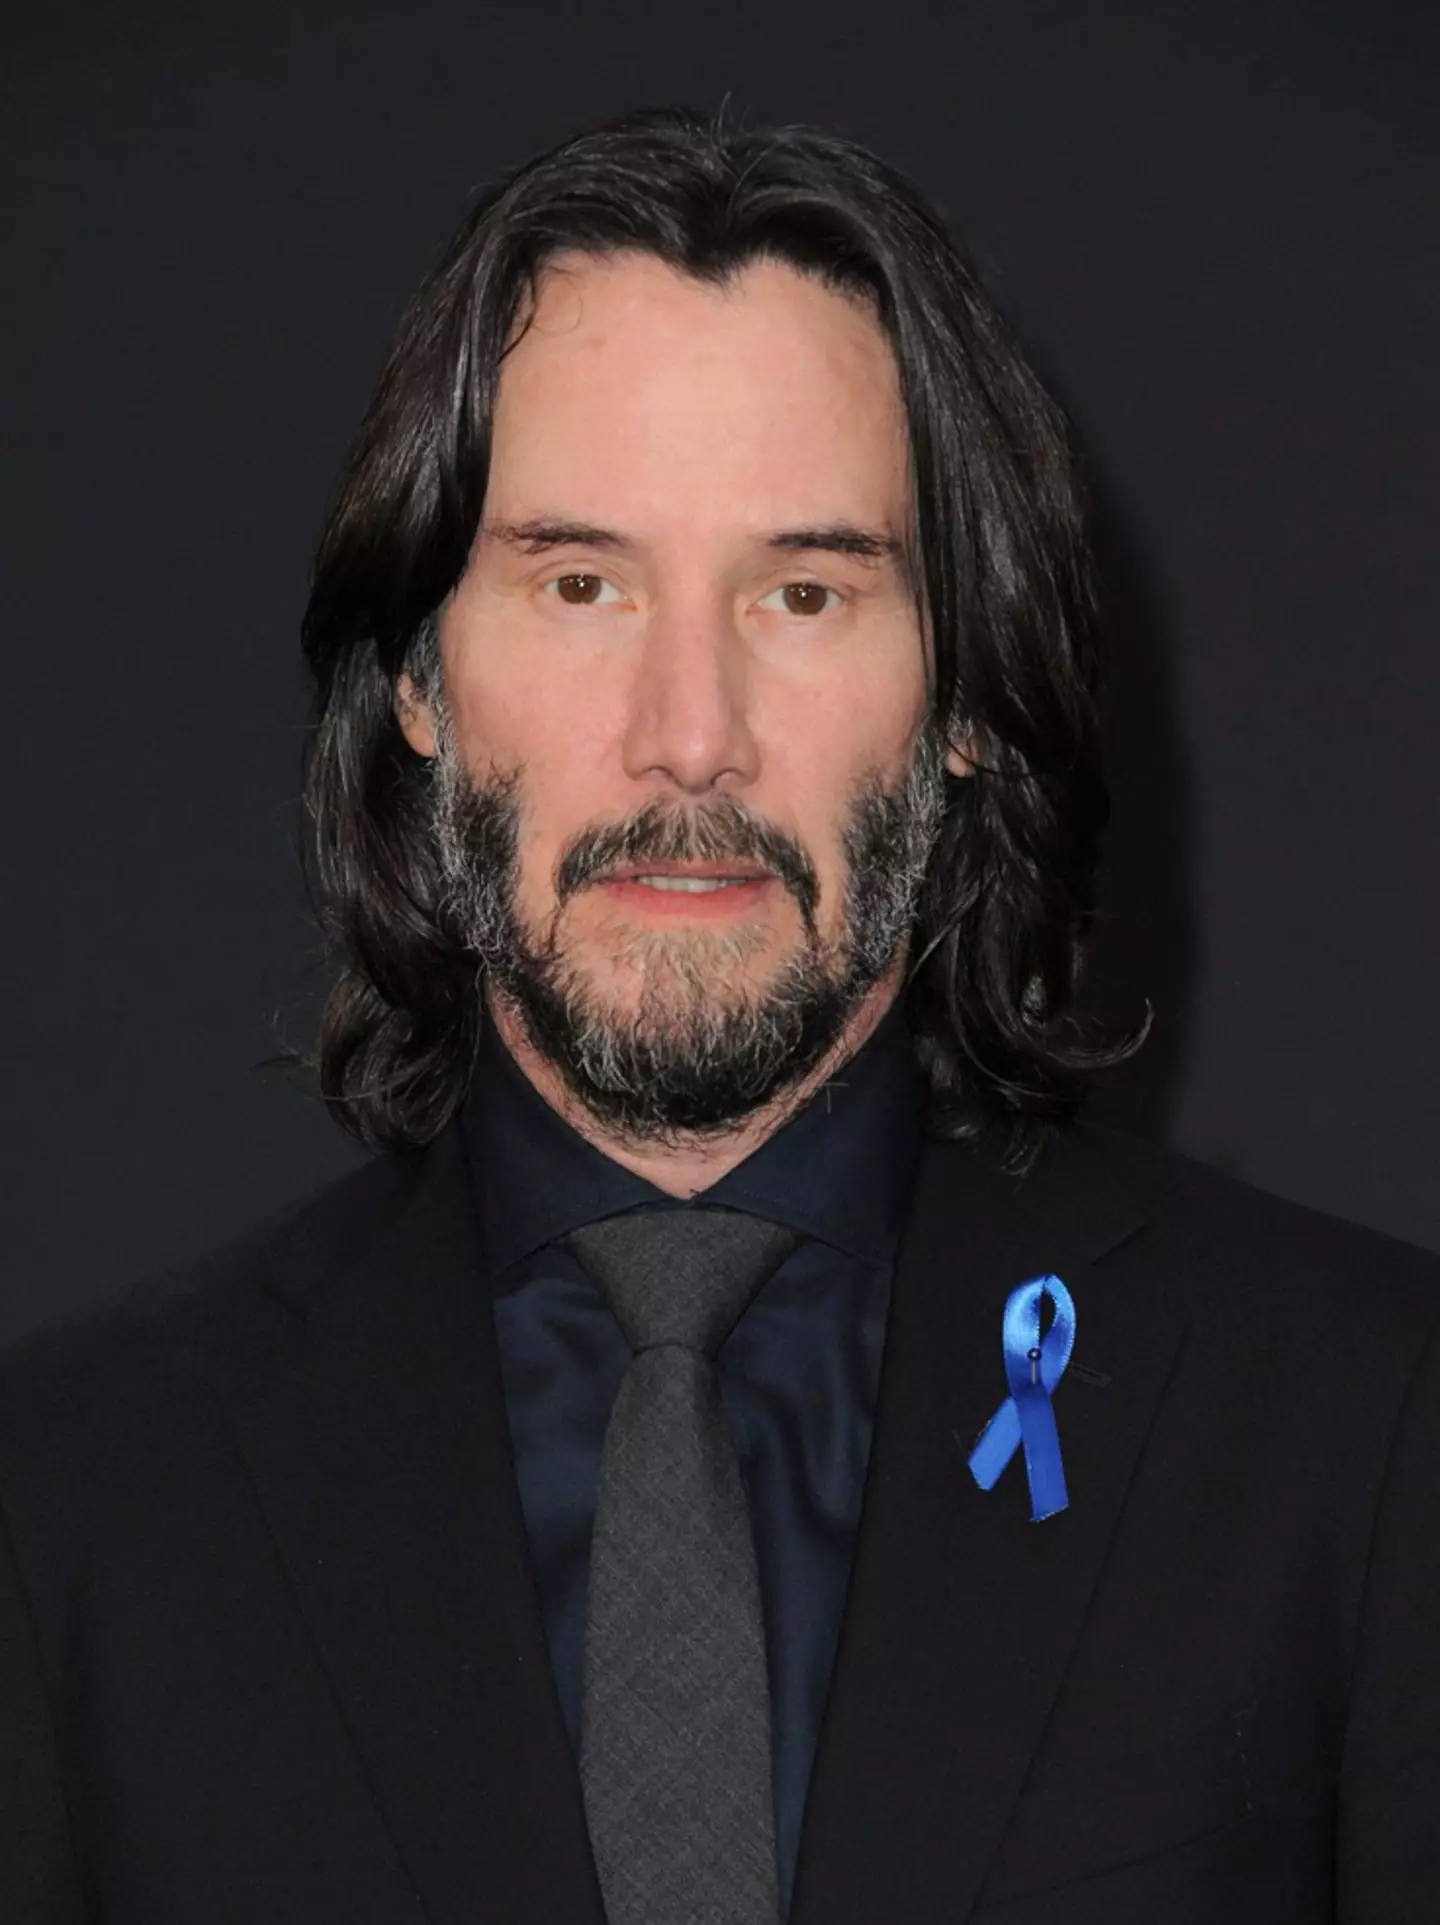 Surely, Keanu Reeves is the nicest guy in Hollywood?